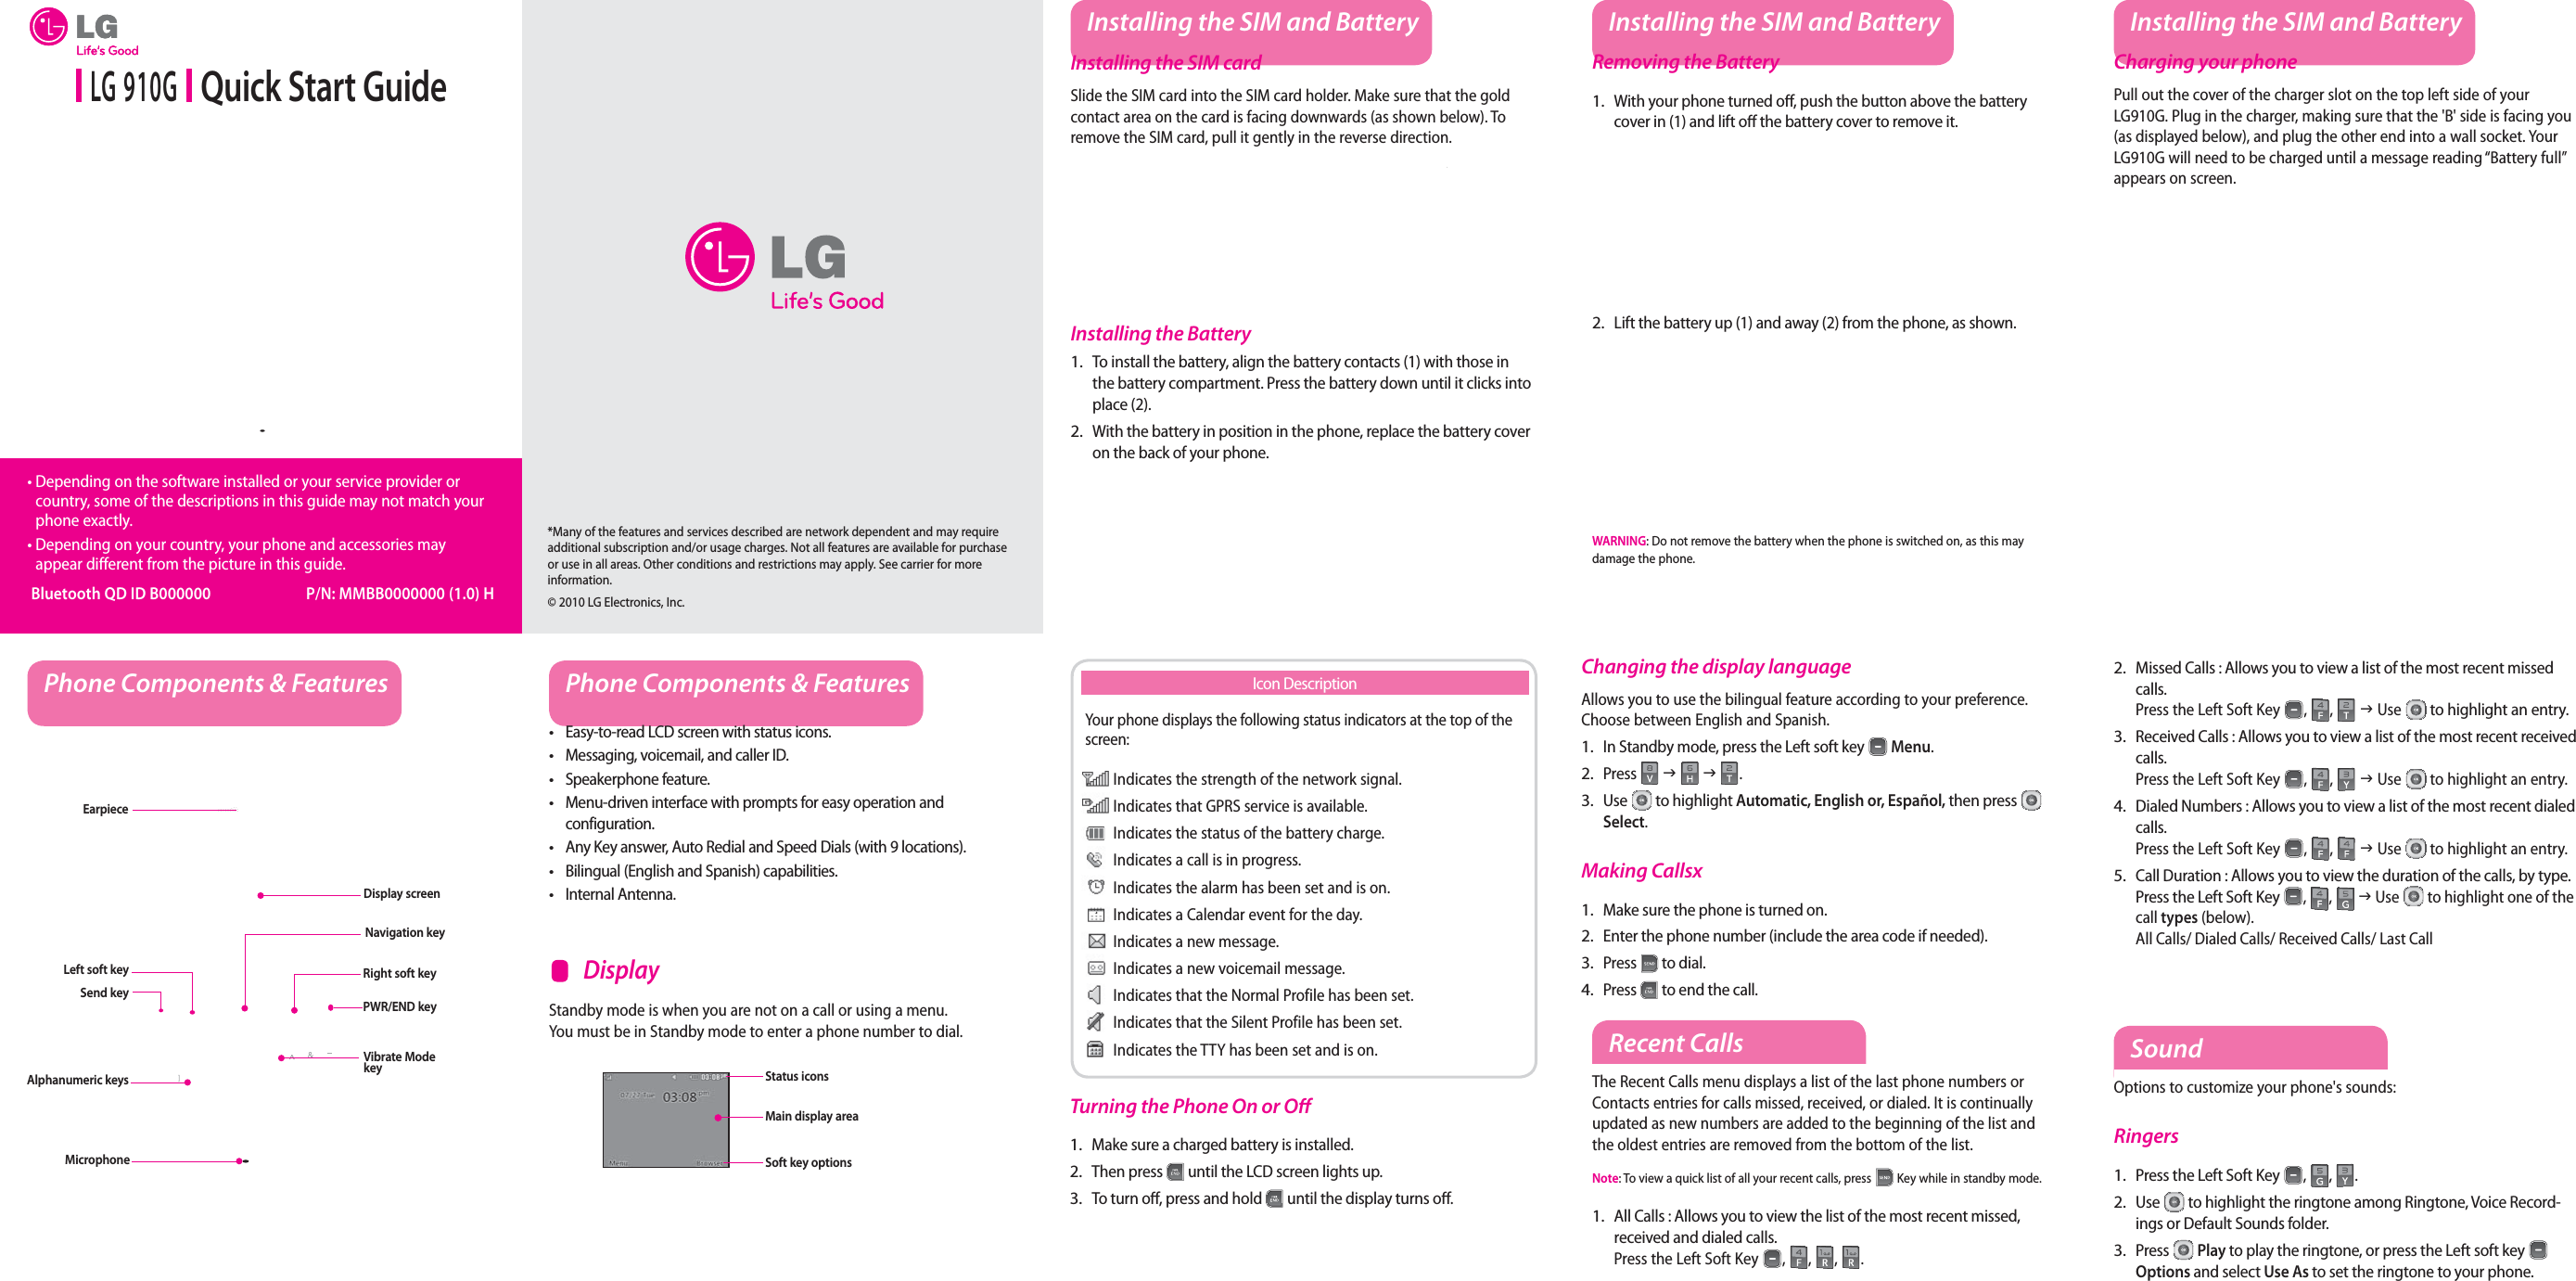  LG 910G   Quick Start Guide•  Depending on the software installed or your service provider or country, some of the descriptions in this guide may not match your phone exactly.•  Depending on your country, your phone and accessories may appear different from the picture in this guide. Bluetooth QD ID B000000  P/N: MMBB0000000 (1.0) HInstalling the SIM and BatteryInstalling the SIM cardSlide the SIM card into the SIM card holder. Make sure that the gold contact area on the card is facing downwards (as shown below). To remove the SIM card, pull it gently in the reverse direction.Installing the BatteryTo install the battery, align the battery contacts (1) with those in the battery compartment. Press the battery down until it clicks into place (2).With the battery in position in the phone, replace the battery cover on the back of your phone.1.2.Removing the BatteryWith your phone turned o , push the button above the battery cover in (1) and lift o  the battery cover to remove it.Lift the battery up (1) and away (2) from the phone, as shown.WARNING: Do not remove the battery when the phone is switched on, as this may damage the phone.1.2.Charging your phonePull out the cover of the charger slot on the top left side of your LG910G. Plug in the charger, making sure that the &apos;B&apos; side is facing you (as displayed below), and plug the other end into a wall socket. Your LG910G will need to be charged until a message reading “Battery full” appears on screen.Installing the SIM and Battery Installing the SIM and BatteryPhone Components &amp; Features Phone Components &amp; FeaturesEasy-to-read LCD screen with status icons.Messaging, voicemail, and caller ID.Speakerphone feature.Menu-driven interface with prompts for easy operation and configuration.Any Key answer, Auto Redial and Speed Dials (with 9 locations).Bilingual (English and Spanish) capabilities.Internal Antenna.•••••••Earpiece Display screenSend keyAlphanumeric keysLeft soft keyMicrophoneRight soft keyPWR/END keyVibrate Mode keyStandby mode is when you are not on a call or using a menu. You must be in Standby mode to enter a phone number to dial.    DisplayNavigation keyStatus iconsMain display areaSoft key optionsYour phone displays the following status indicators at the top of the screen: Indicates the strength of the network signal. Indicates that GPRS service is available. Indicates the status of the battery charge. Indicates a call is in progress. Indicates the alarm has been set and is on. Indicates a Calendar event for the day. Indicates a new message. Indicates a new voicemail message. Indicates that the Normal Profile has been set. Indicates that the Silent Profile has been set. Indicates the TTY has been set and is on.Icon DescriptionTurning the Phone On or O Make sure a charged battery is installed.Then press   until the LCD screen lights up.To turn o , press and hold   until the display turns o .1.2.3.Changing the display languageAllows you to use the bilingual feature according to your preference. Choose between English and Spanish.In Standby mode, press the Left soft key   Menu.Press   J   J  .Use   to highlight Automatic, English or, Español, then press   Select.Making CallsxMake sure the phone is turned on.Enter the phone number (include the area code if needed).Press   to dial.Press   to end the call.1.2.3.1.2.3.4.Recent CallsThe Recent Calls menu displays a list of the last phone numbers or Contacts entries for calls missed, received, or dialed. It is continually updated as new numbers are added to the beginning of the list and the oldest entries are removed from the bottom of the list.Note: To view a quick list of all your recent calls, press   Key while in standby mode.All Calls : Allows you to view the list of the most recent missed, received and dialed calls.  Press the Left Soft Key , , , .1.SoundOptions to customize your phone&apos;s sounds:RingersPress the Left Soft Key , ,  .Use   to highlight the ringtone among Ringtone, Voice Record-ings or Default Sounds folder.Press   Play to play the ringtone, or press the Left soft key   Options and select Use As to set the ringtone to your phone.1.2.3.Missed Calls : Allows you to view a list of the most recent missed calls.   Press the Left Soft Key , ,  J Use  to highlight an entry.Received Calls : Allows you to view a list of the most recent received calls.   Press the Left Soft Key , ,  J Use   to highlight an entry.Dialed Numbers : Allows you to view a list of the most recent dialed calls.   Press the Left Soft Key , ,   J Use   to highlight an entry.Call Duration : Allows you to view the duration of the calls, by type. Press the Left Soft Key , ,  J Use   to highlight one of the call types (below). All Calls/ Dialed Calls/ Received Calls/ Last Call2.3.4.5.*Many of the features and services described are network dependent and may require additional subscription and/or usage charges. Not all features are available for purchase or use in all areas. Other conditions and restrictions may apply. See carrier for more information.© 2010 LG Electronics, Inc.